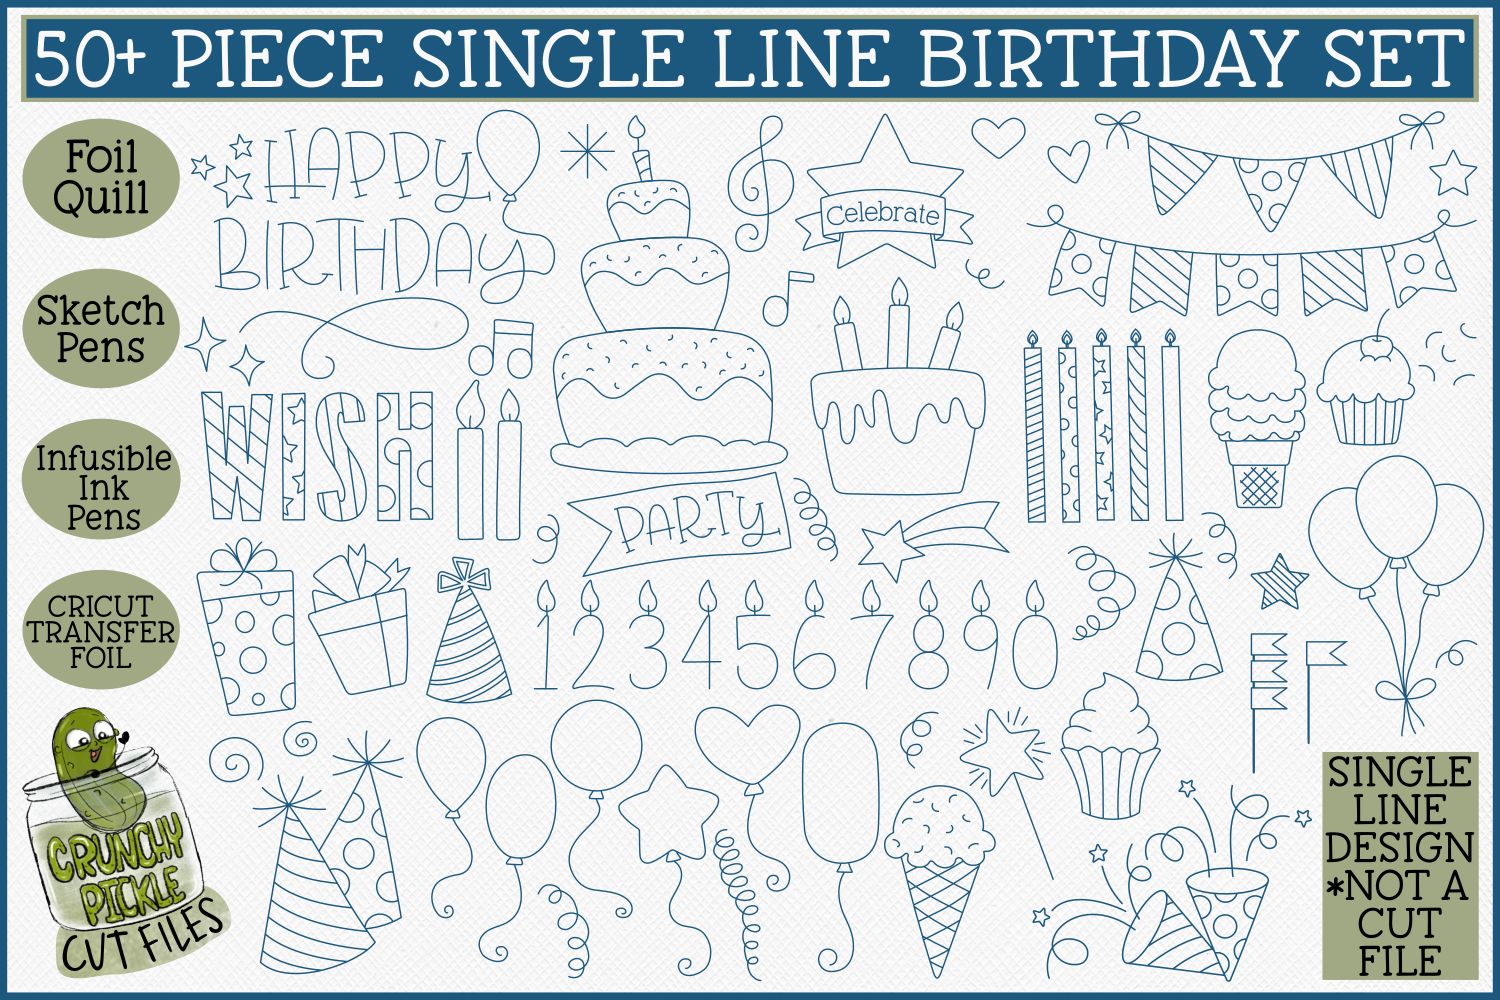 Foil Quill Birthday 50 Piece Bundle, Single Line SVG Designs By